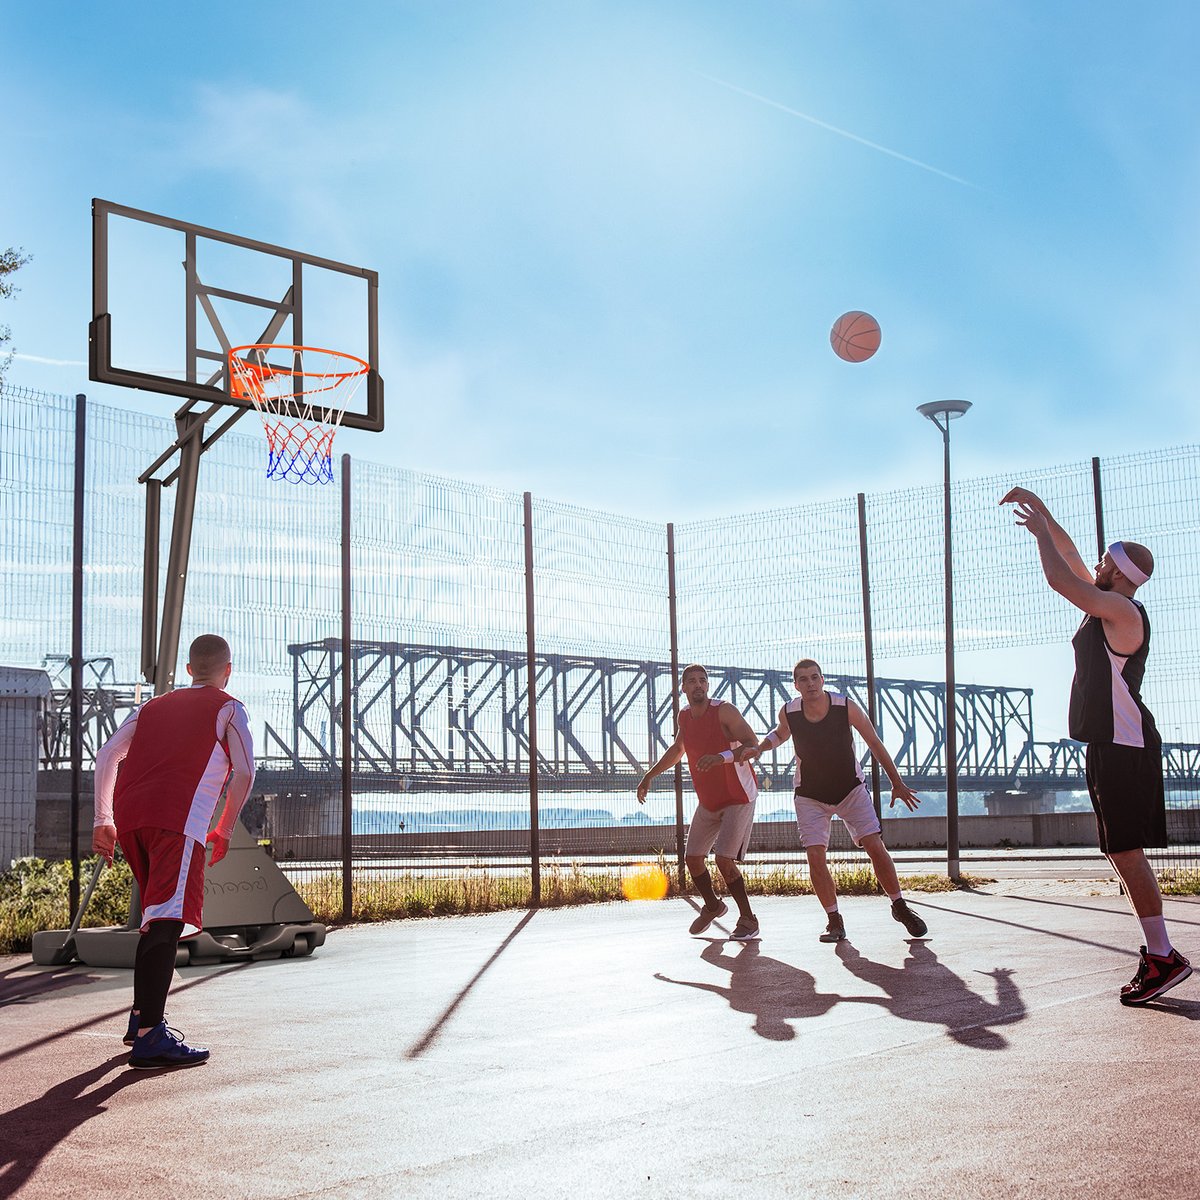 Let's hoop it up! Whether you're a seasoned pro or just starting out, there's always room on the court for one more player. 

 #healthylifestyle #basketballhoops #Outdoorplay #Yohood